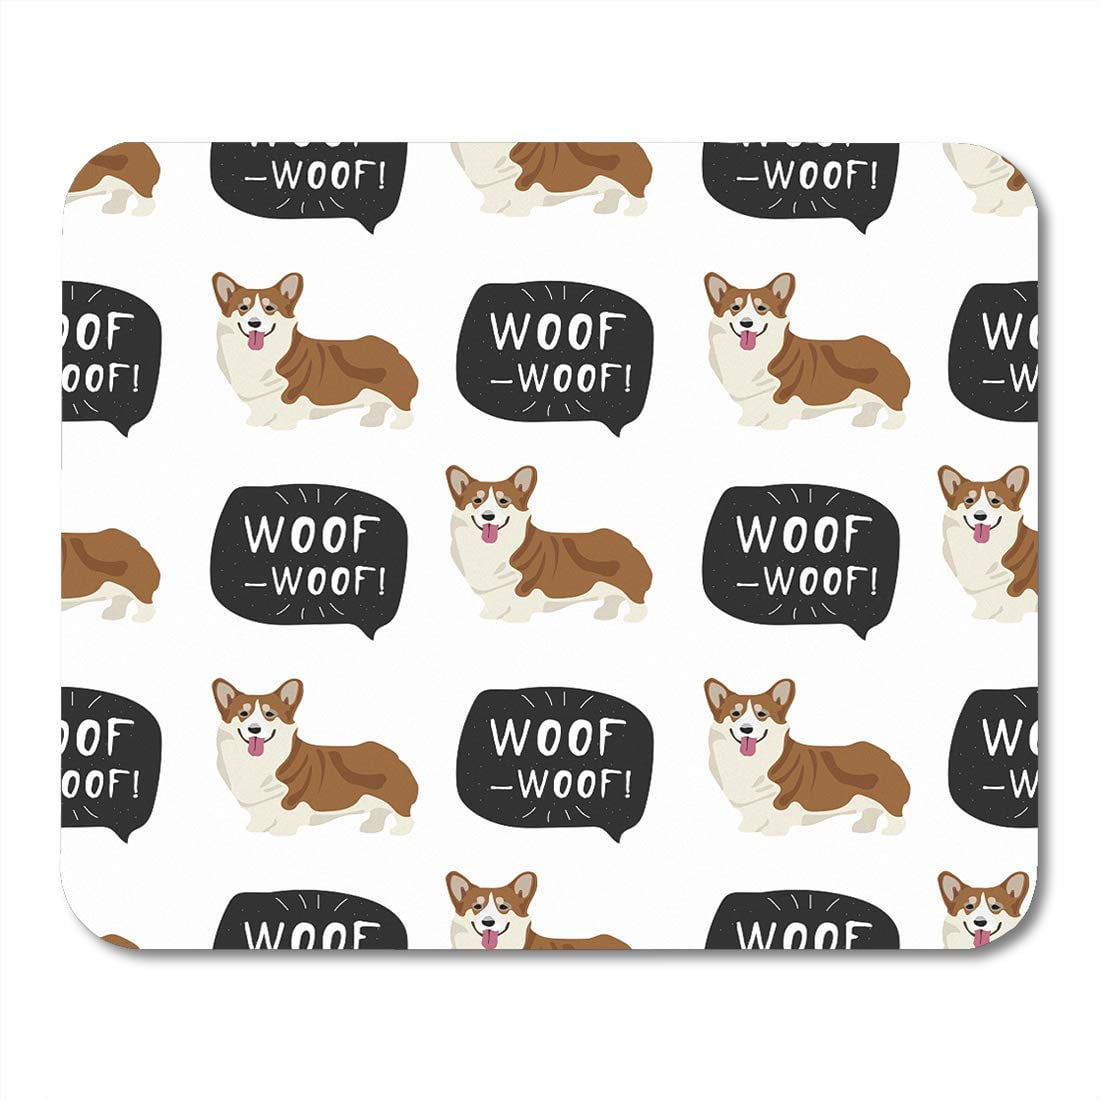 Unique Pattern Optical Mice Mobile Wireless Mouse 2.4G Portable for Notebook Computer PC Corgi Dogs Pattern Laptop